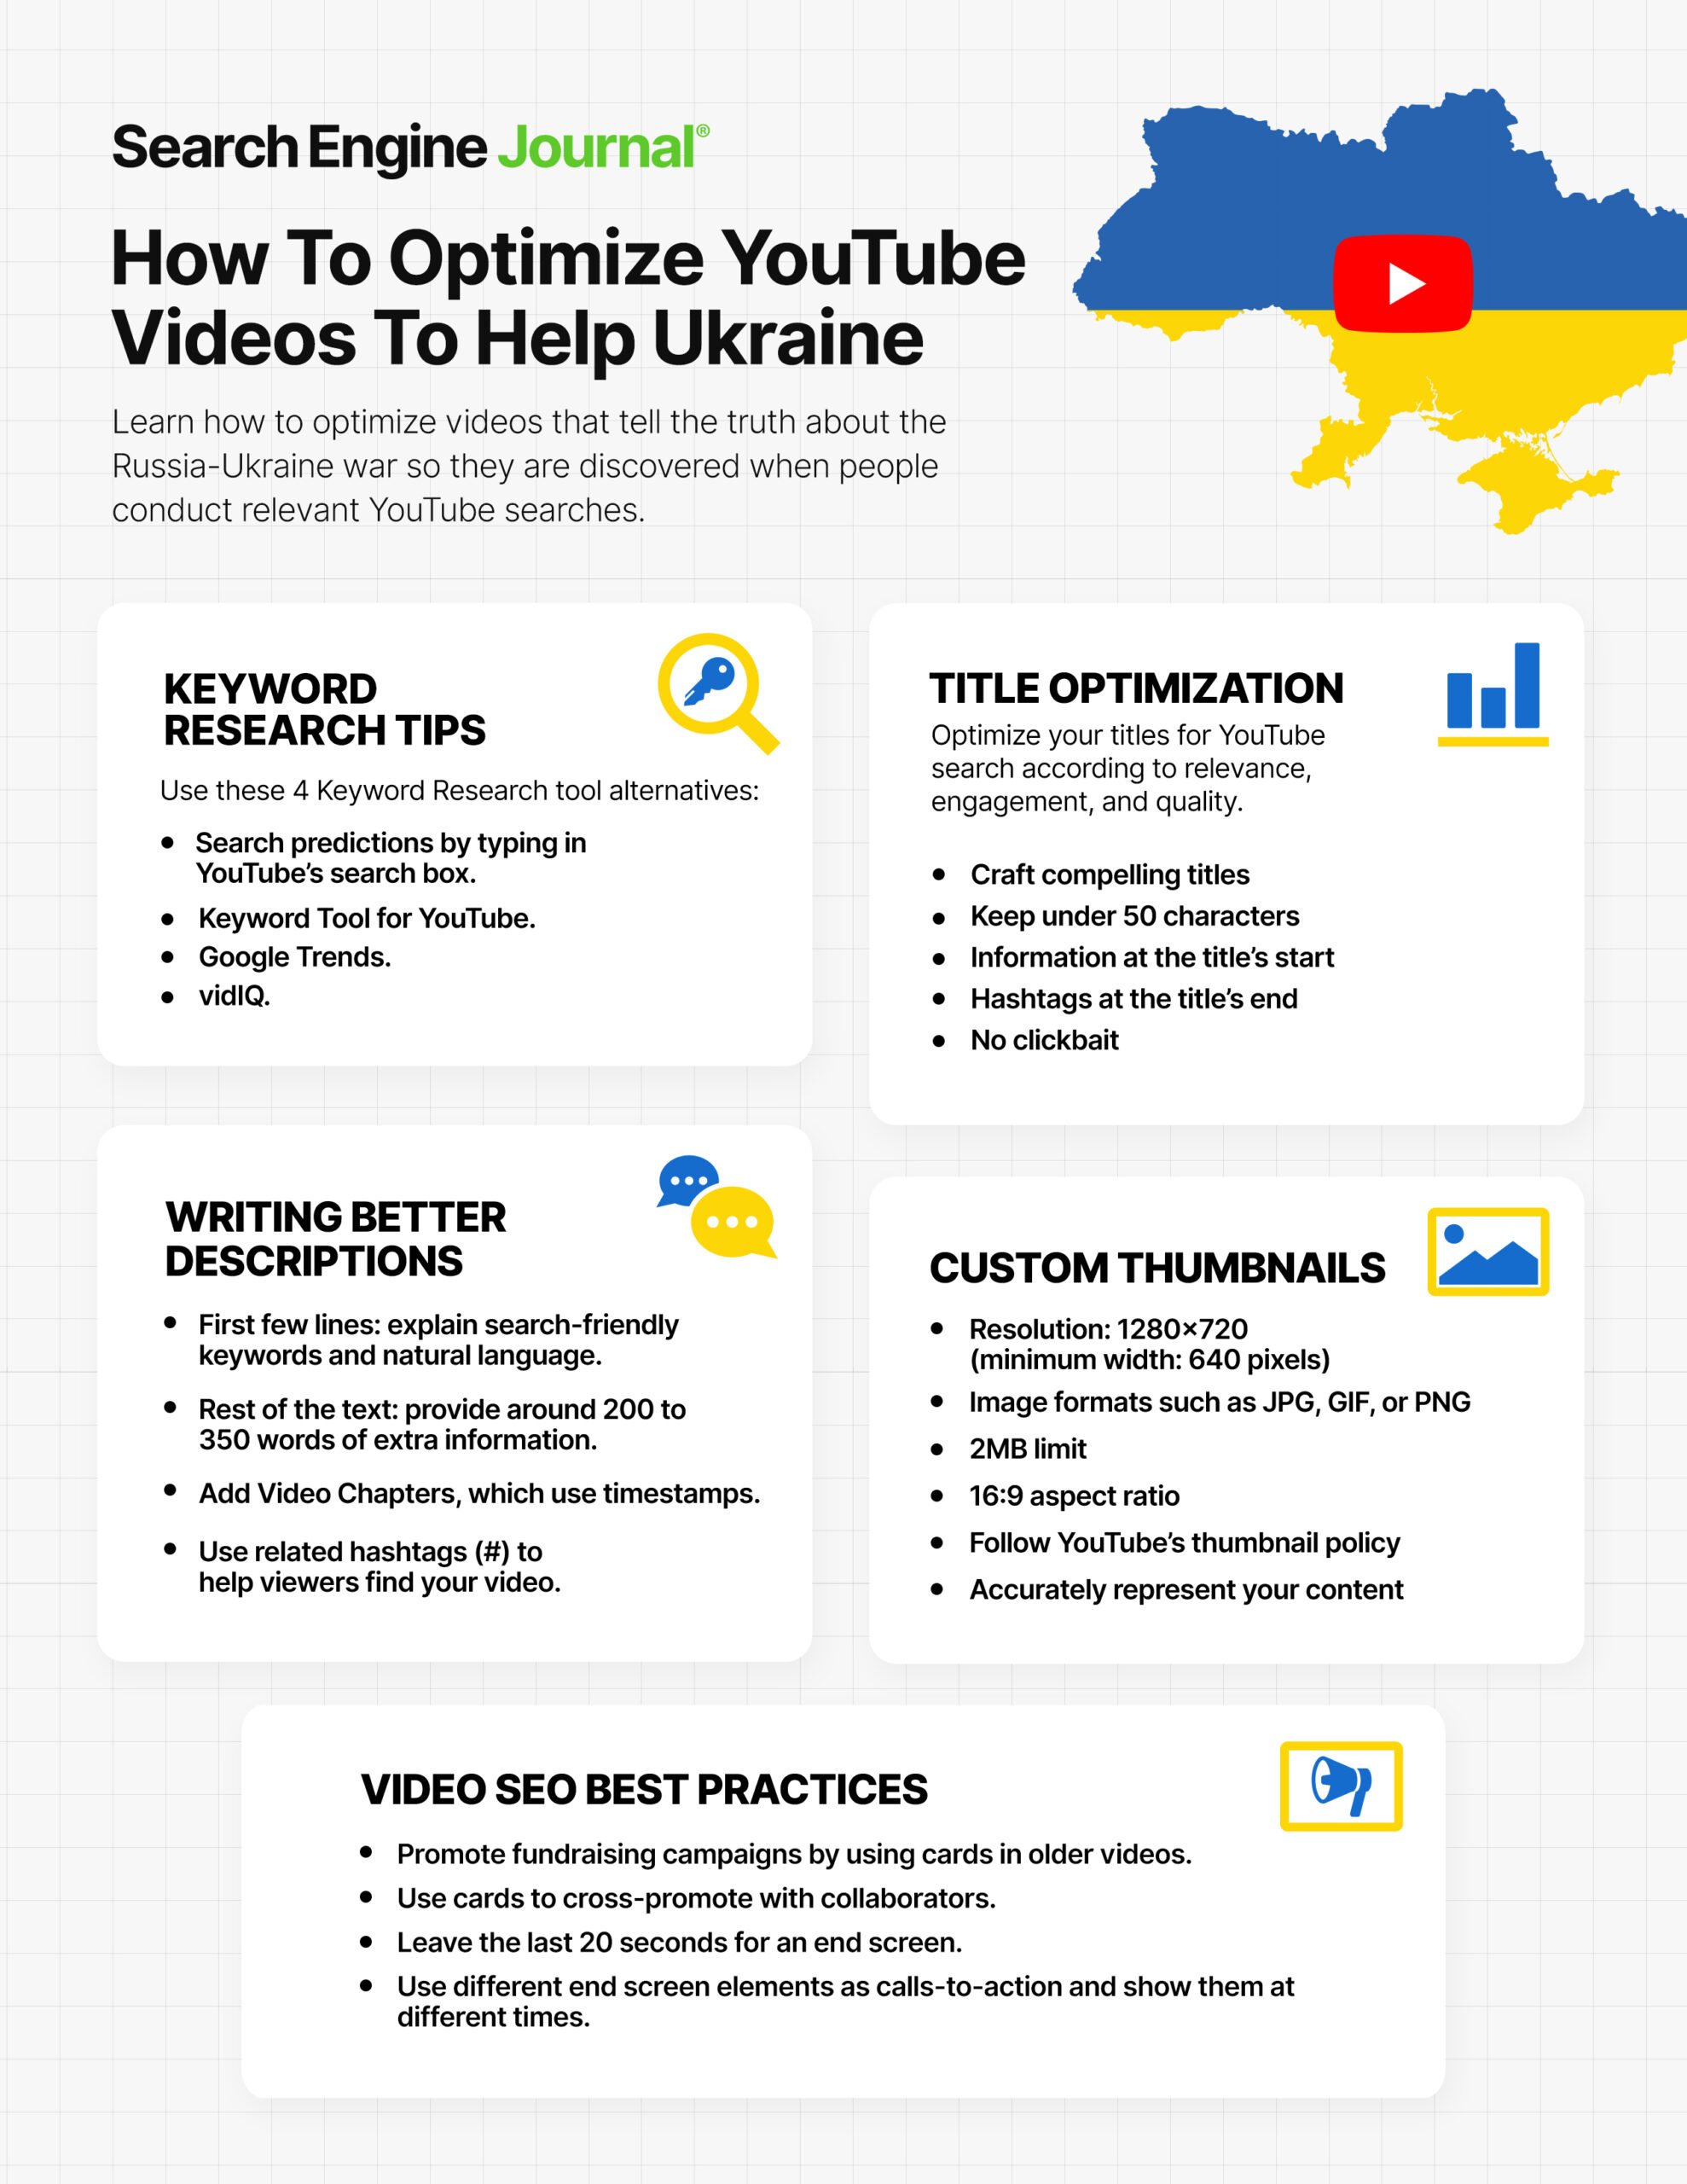 How to optimize YouTube videos to support Ukraine.